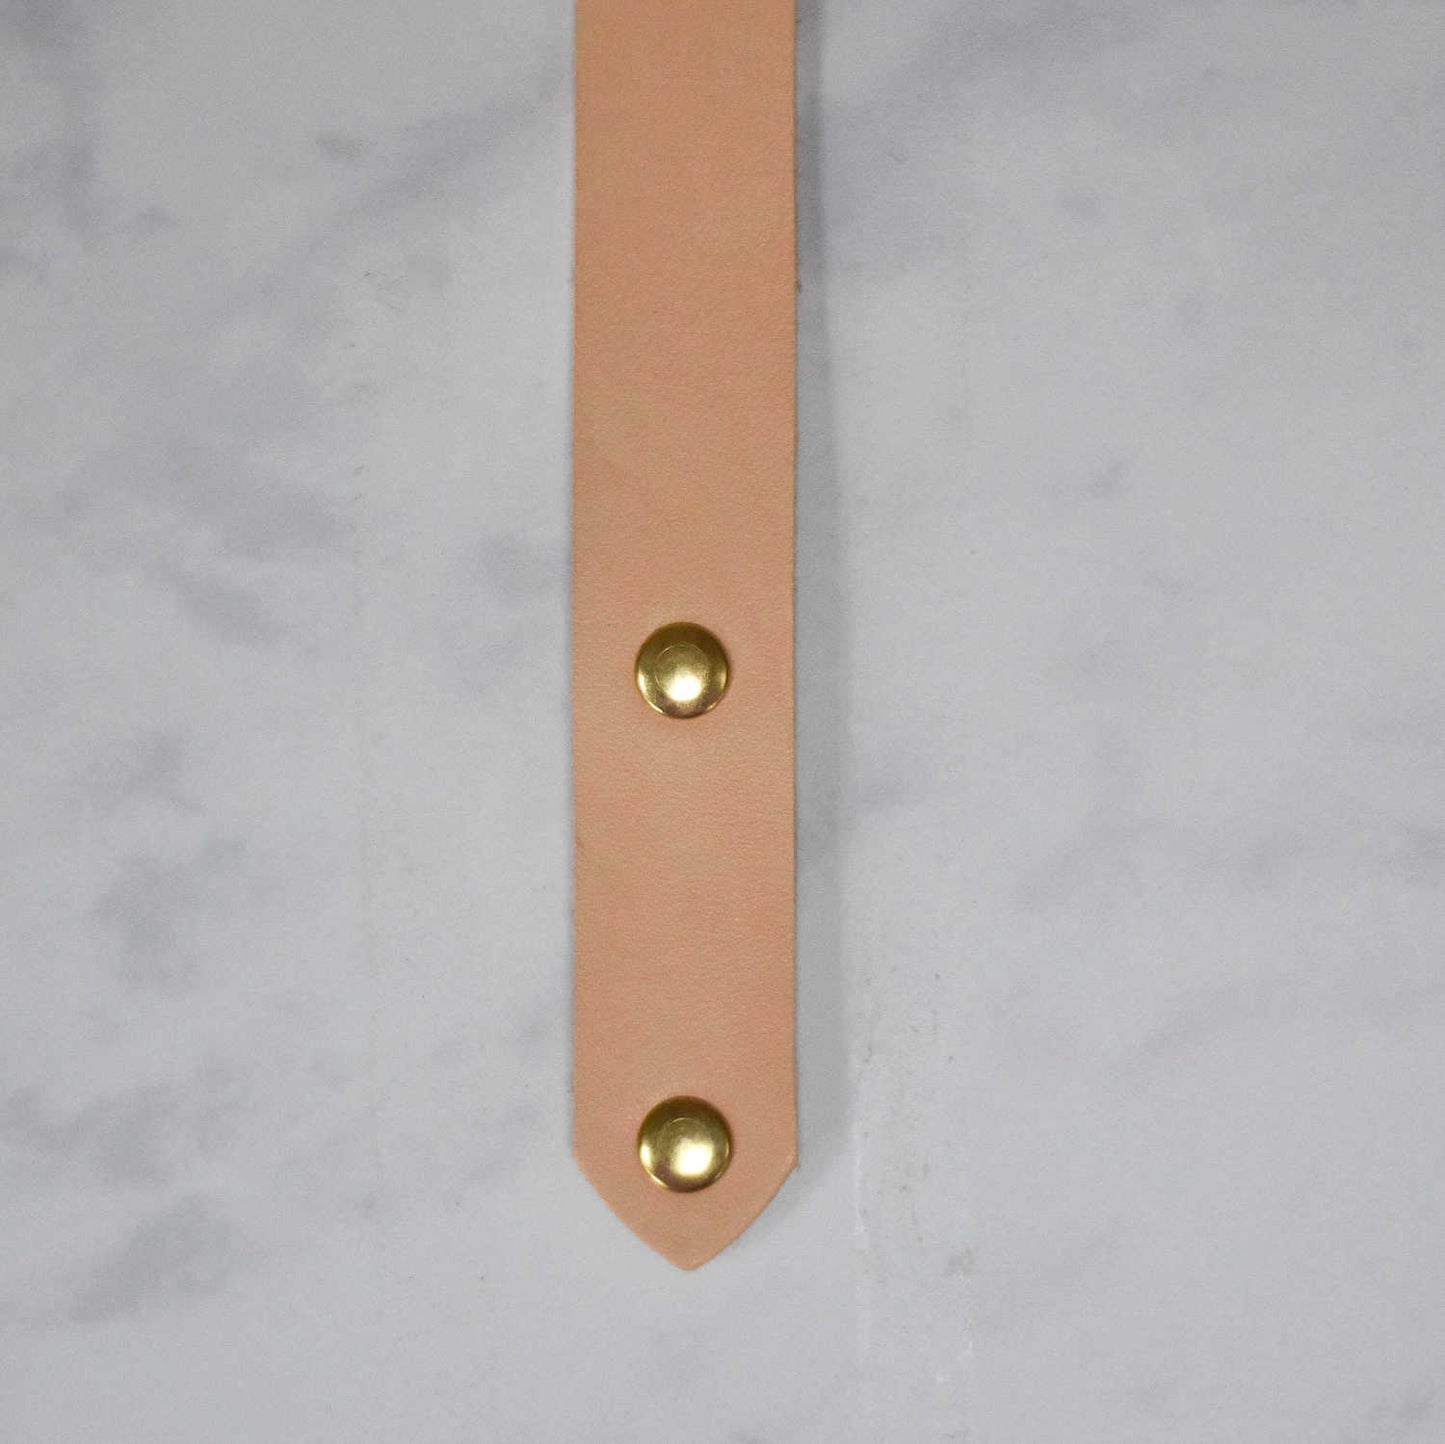 Leather Tote Bag Handles with Rivets